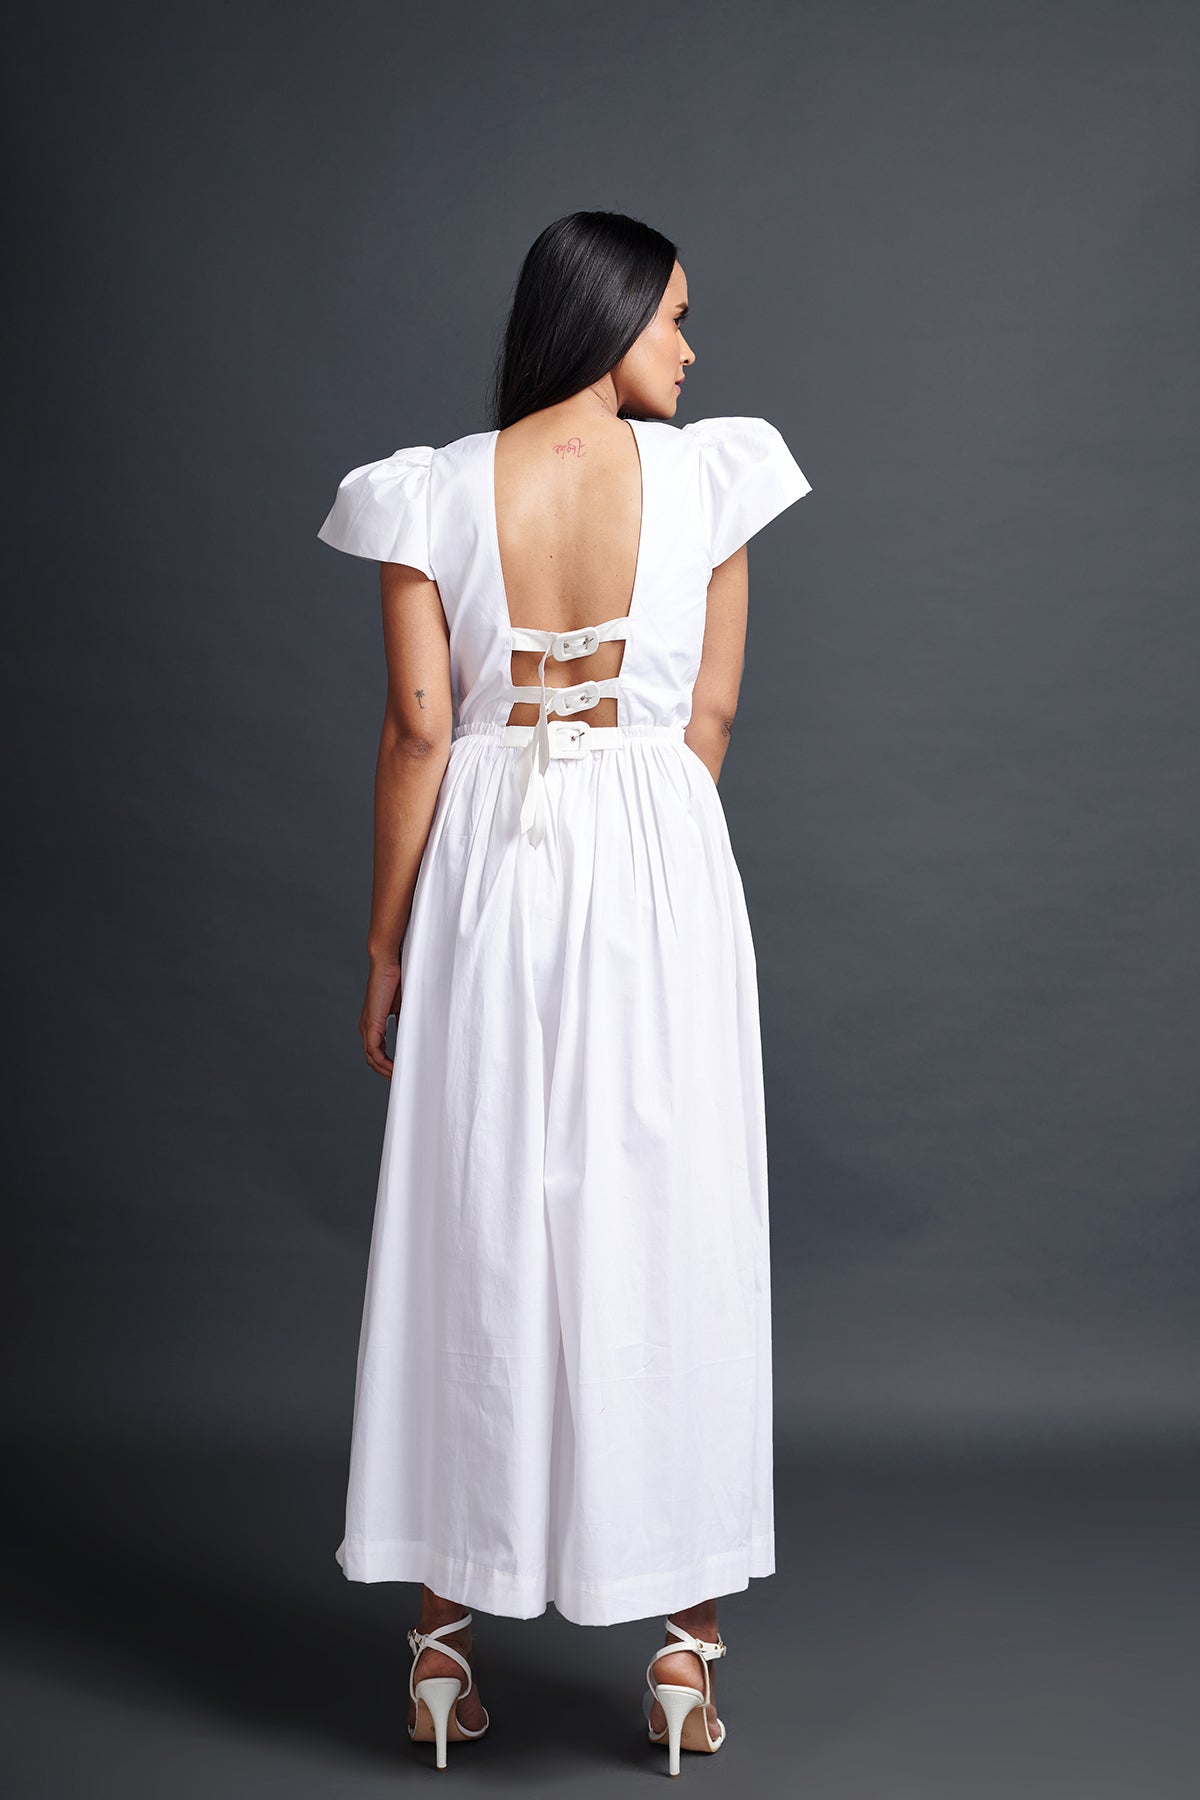 Image of WHITE BACKLESS JUMPSUIT IN COTTON BASE WITH CUTWORK EMBROIDERY. From savoirfashions.com